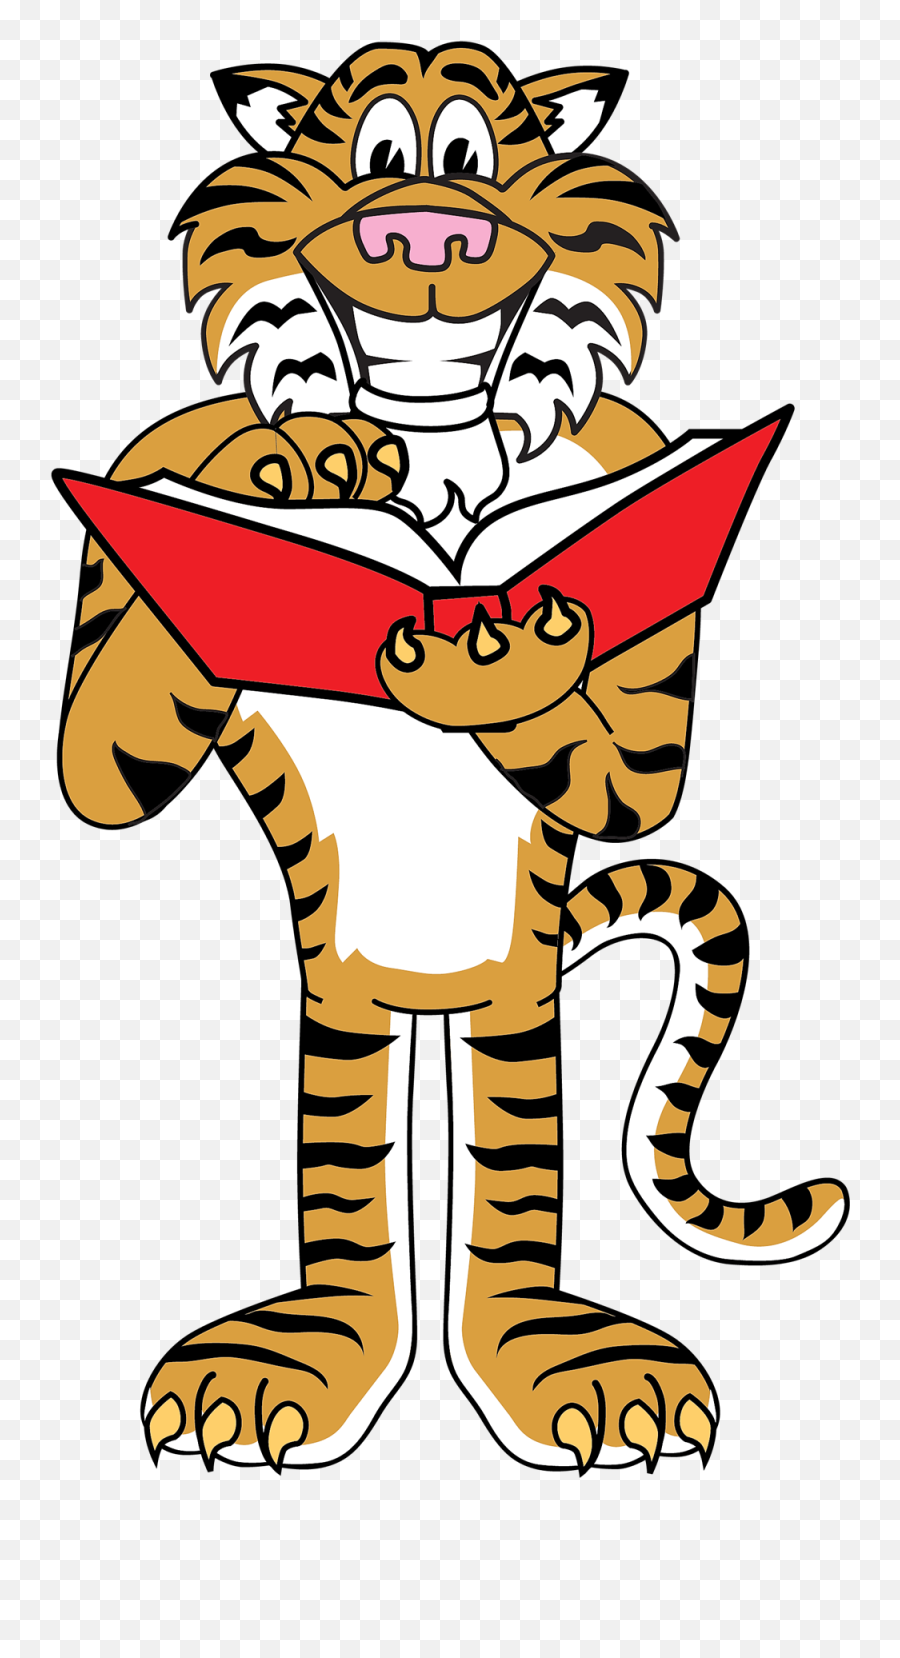 Tiger Reading A Book Clipart - Full Size Clipart 1635795 Tiger Holding A Book Emoji,Emoji Reading A Book